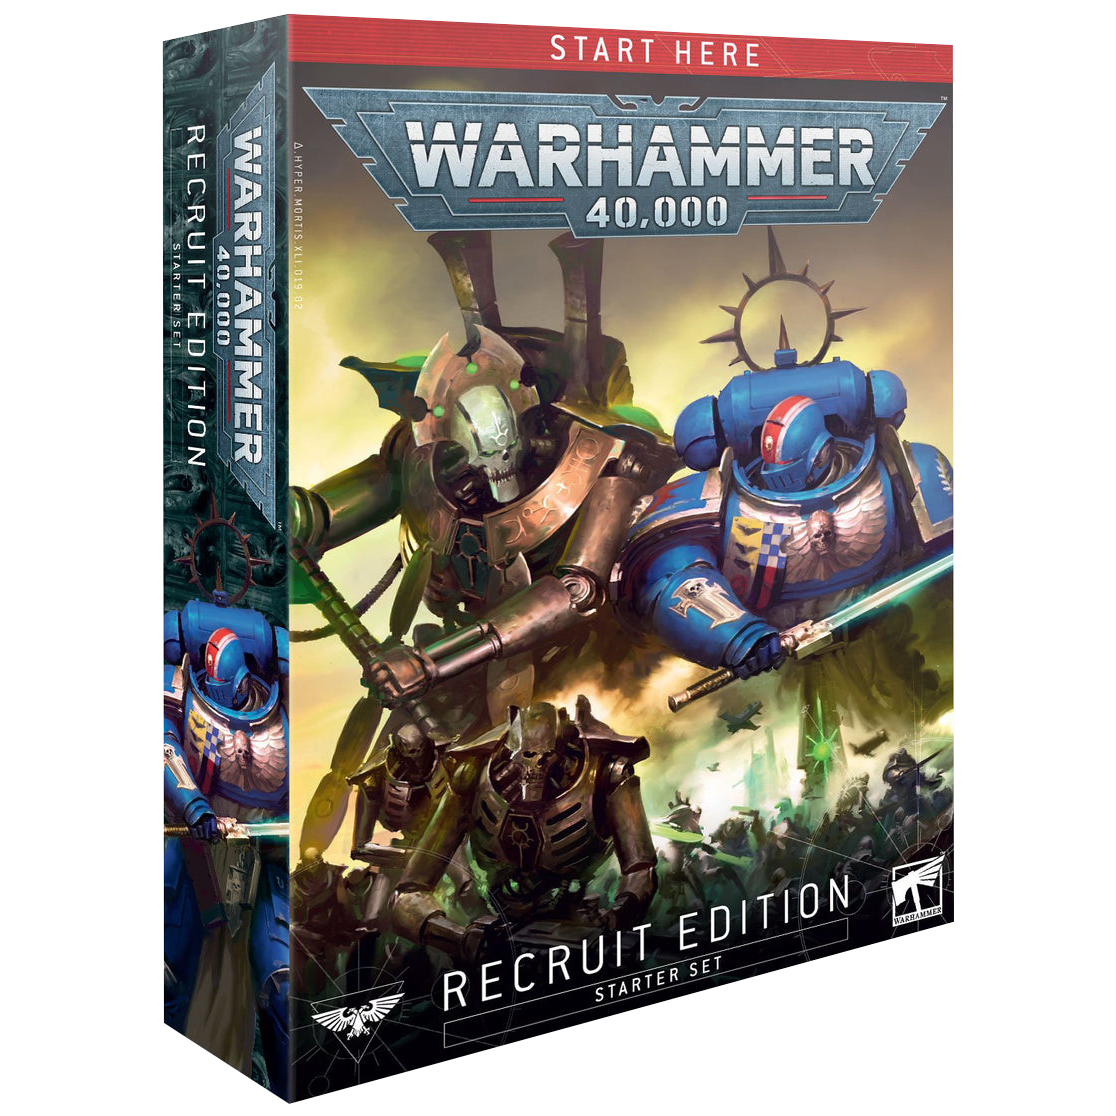 Warhammer 40k Games: Expanding Your Gaming Group with Recruitment and Outreach Strategies